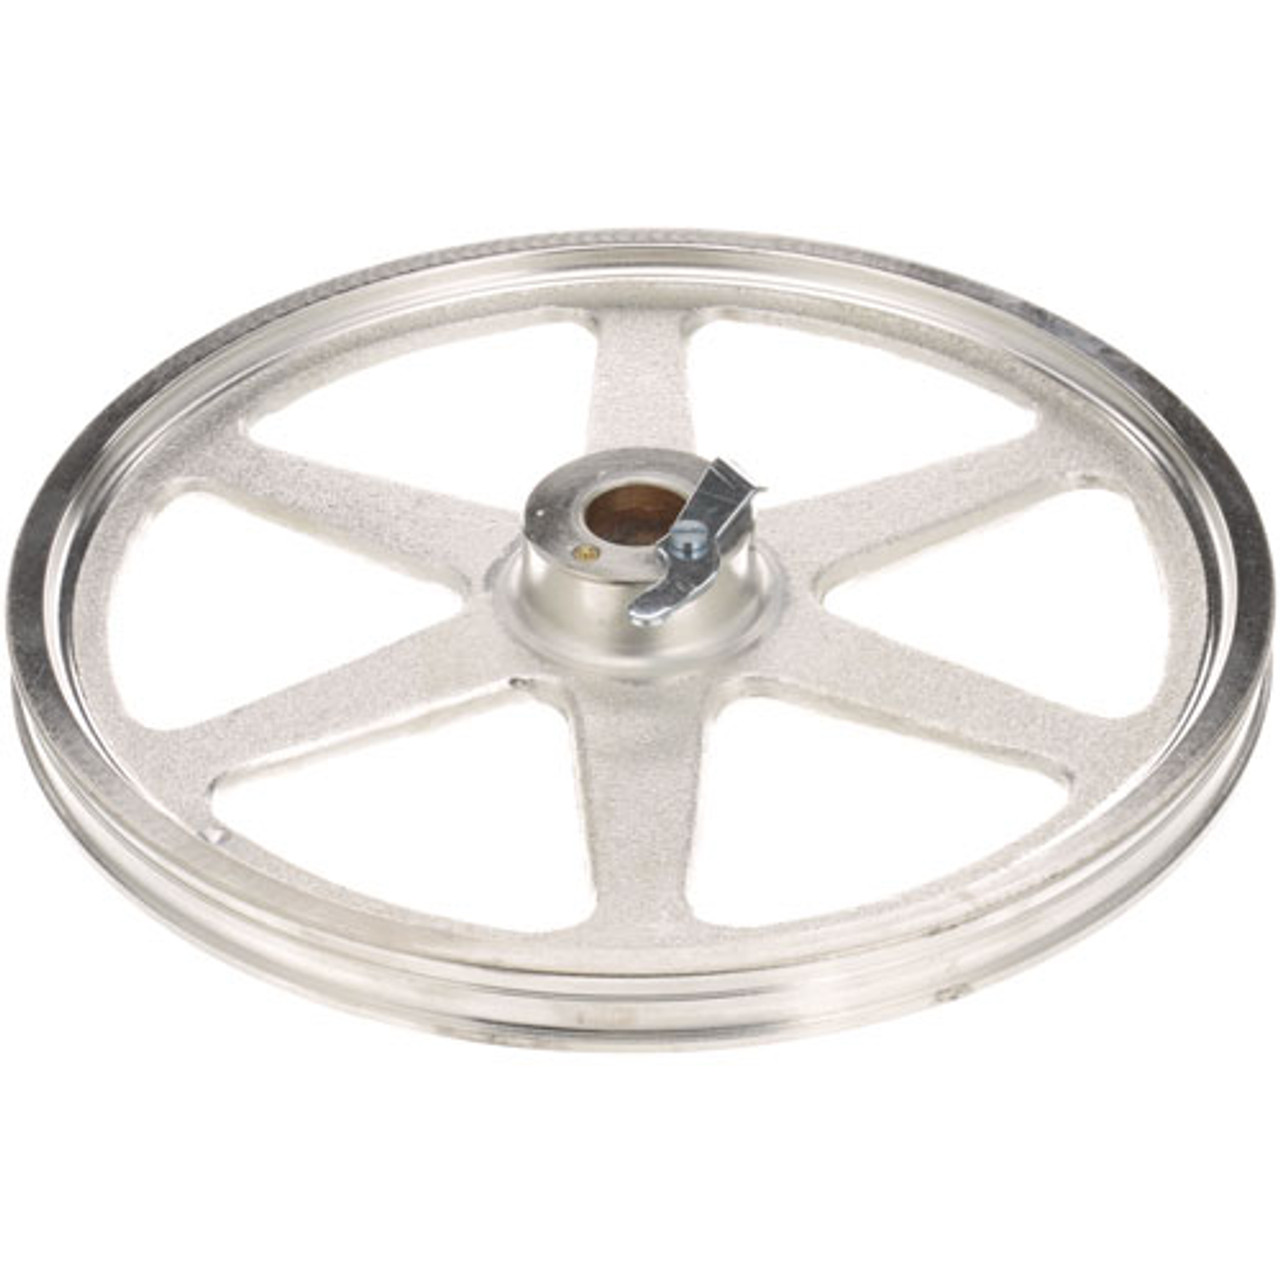 Saw Wheel - Replacement Part For Hobart 00-439888